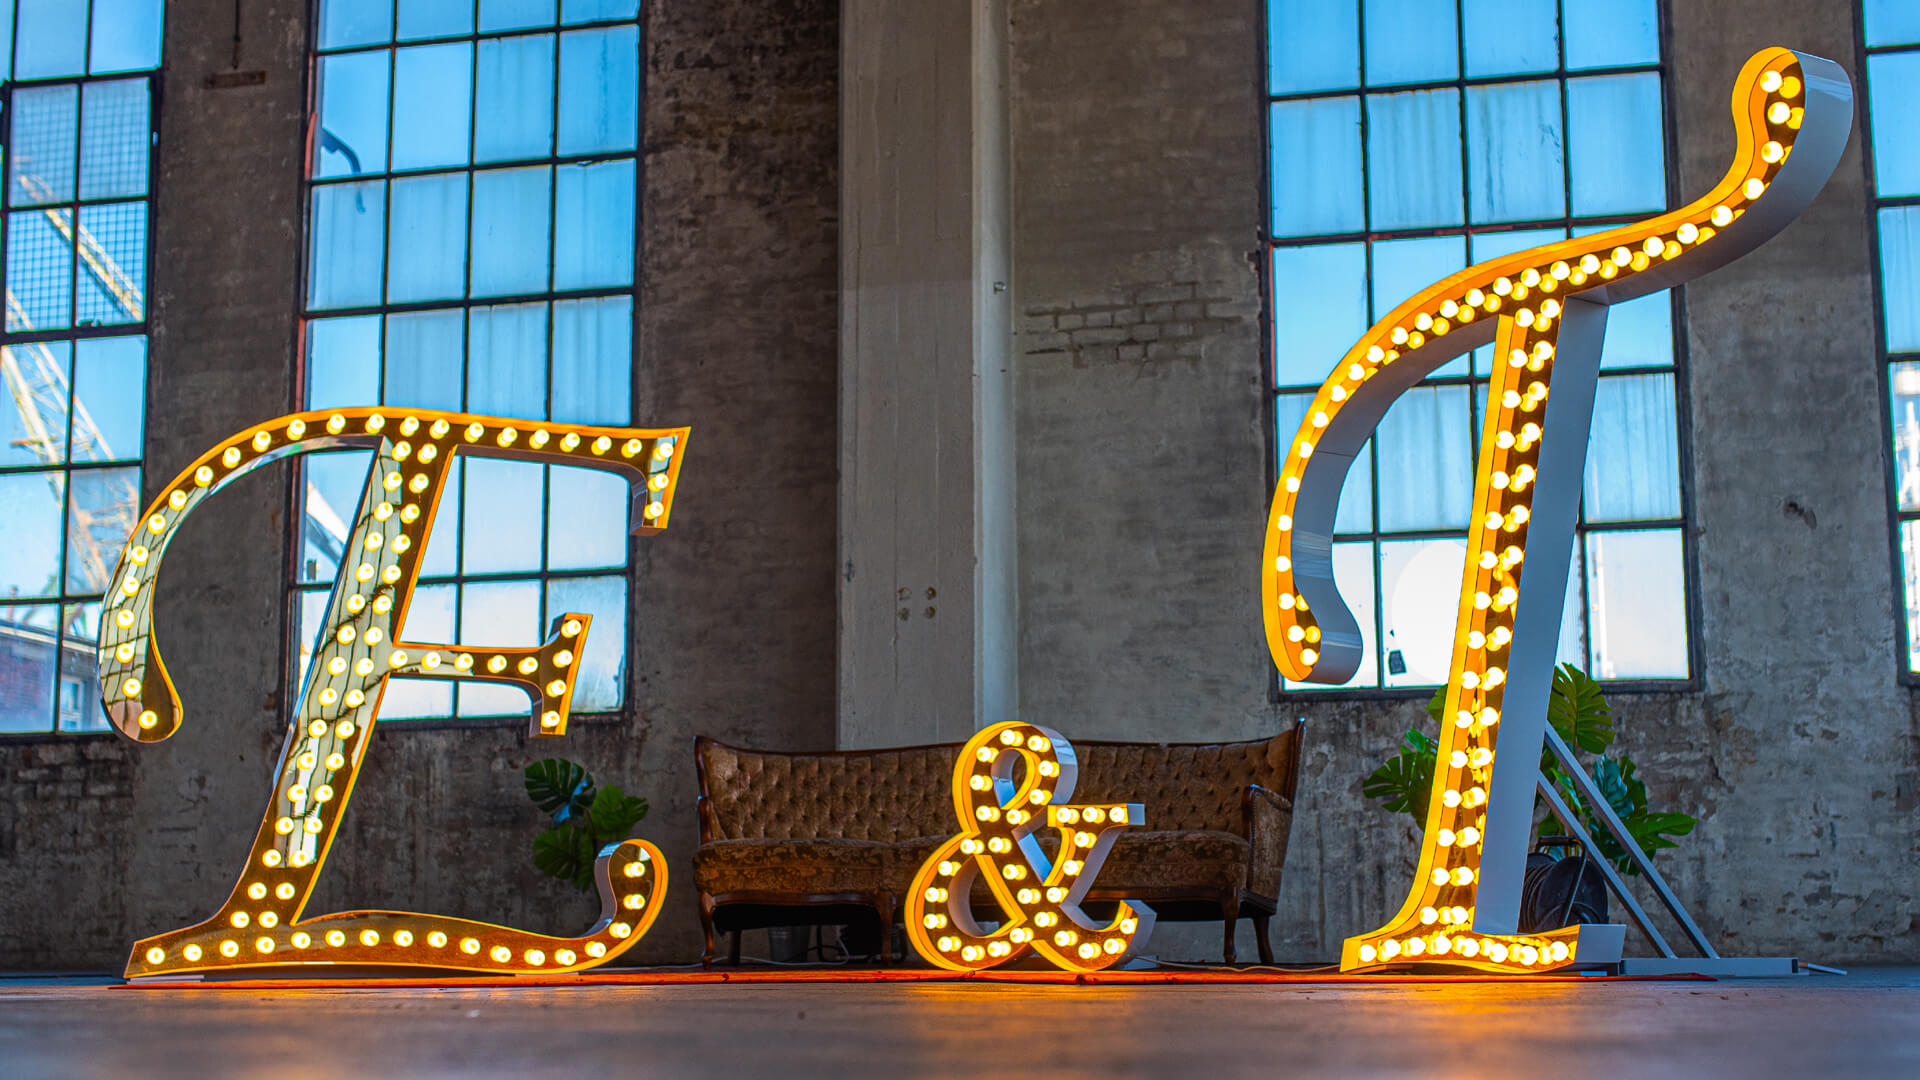 E & T letters with light bulbs - capital letters E and T with & sign, illuminated with filament lamp